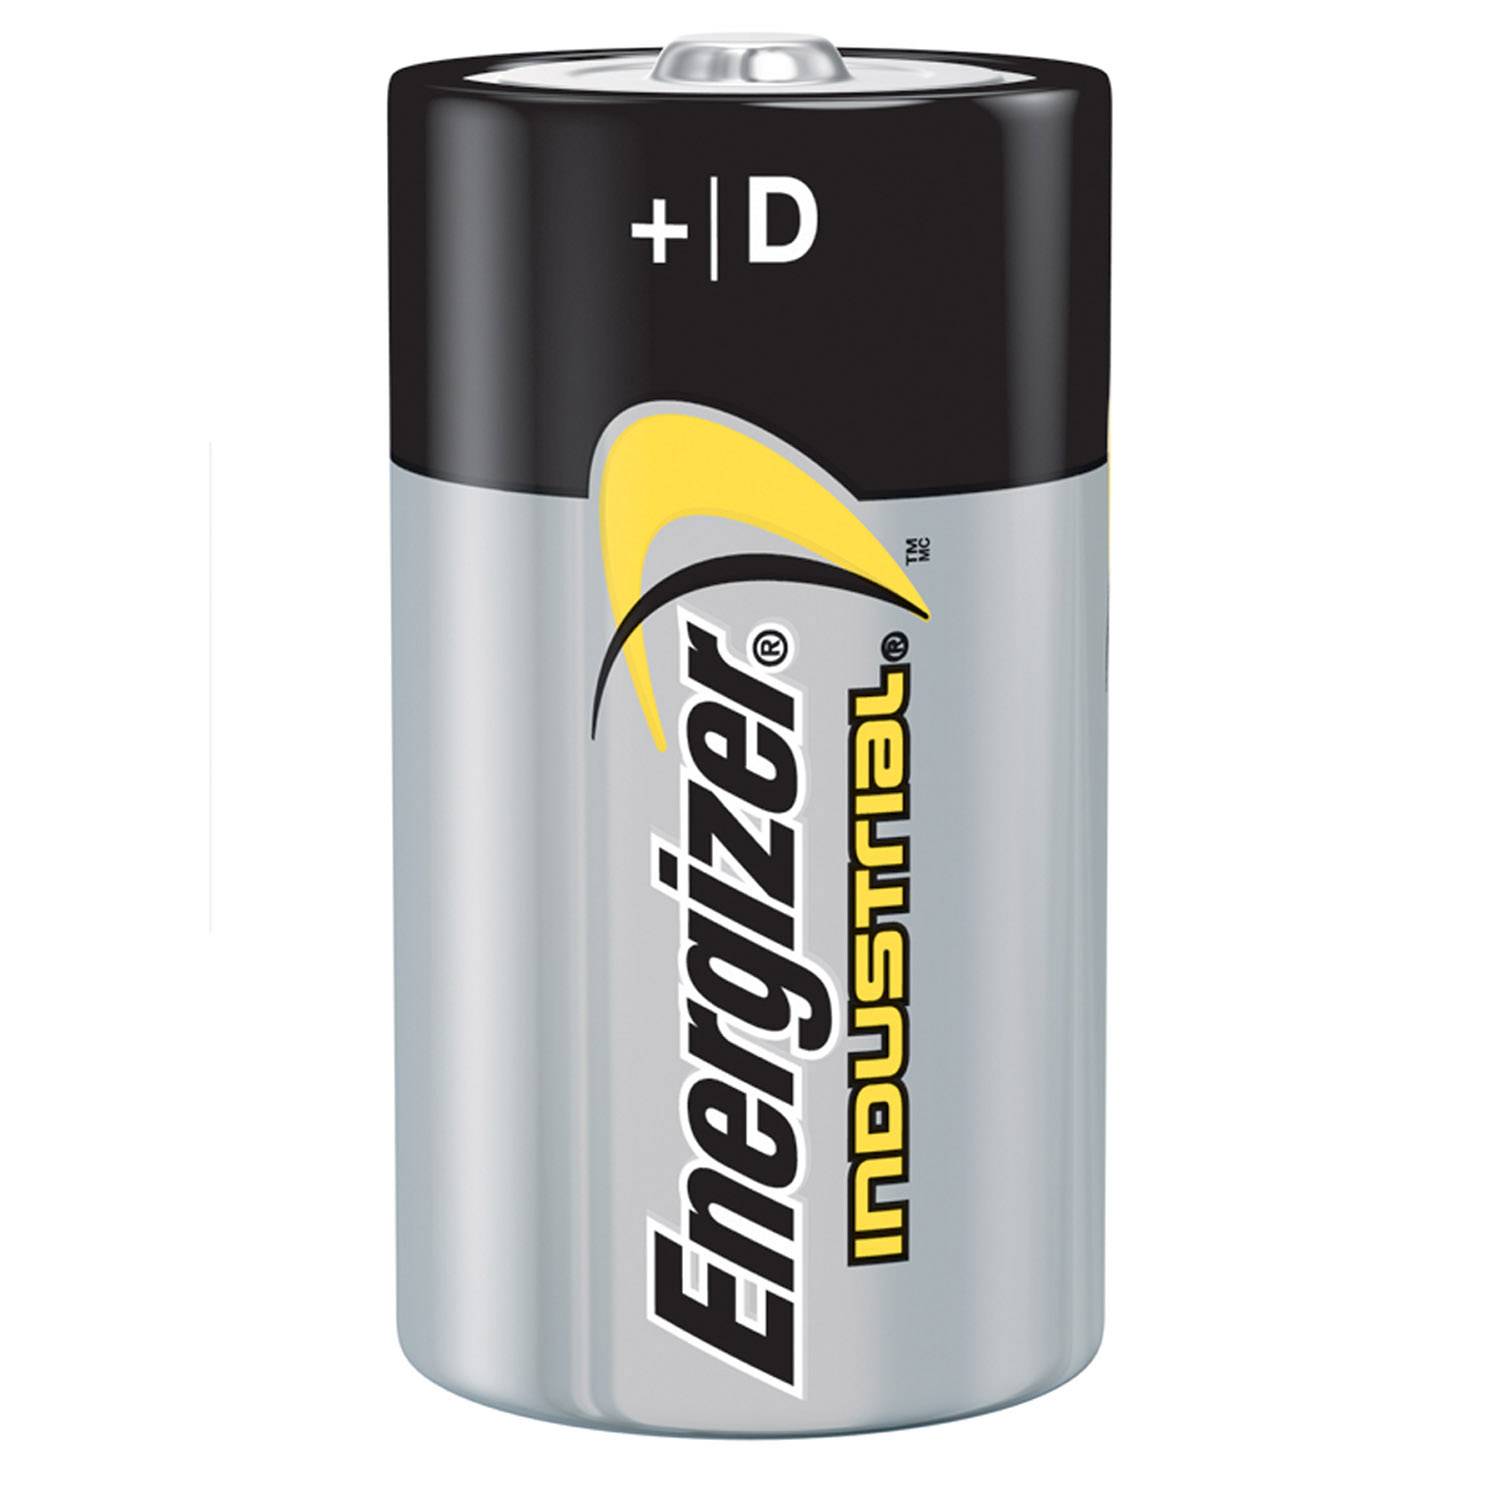 Energizer Industrial D Cell Batteries